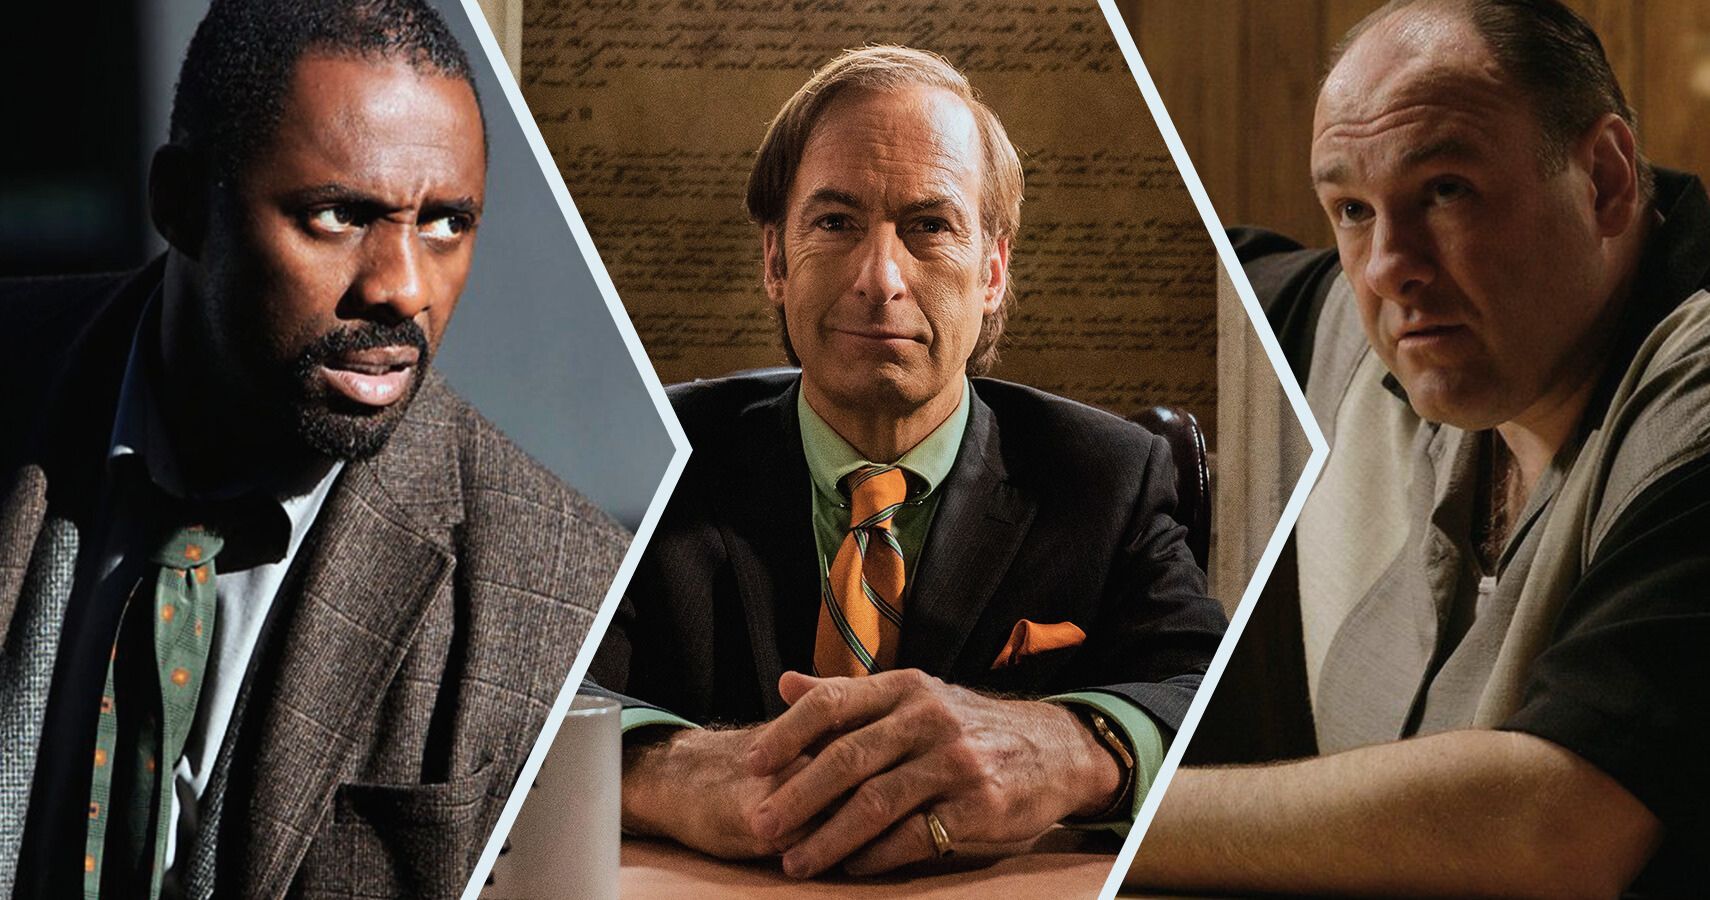 A split image of Luther in Luther, Saul in Better Call Saul, and Tony in The Sopranos